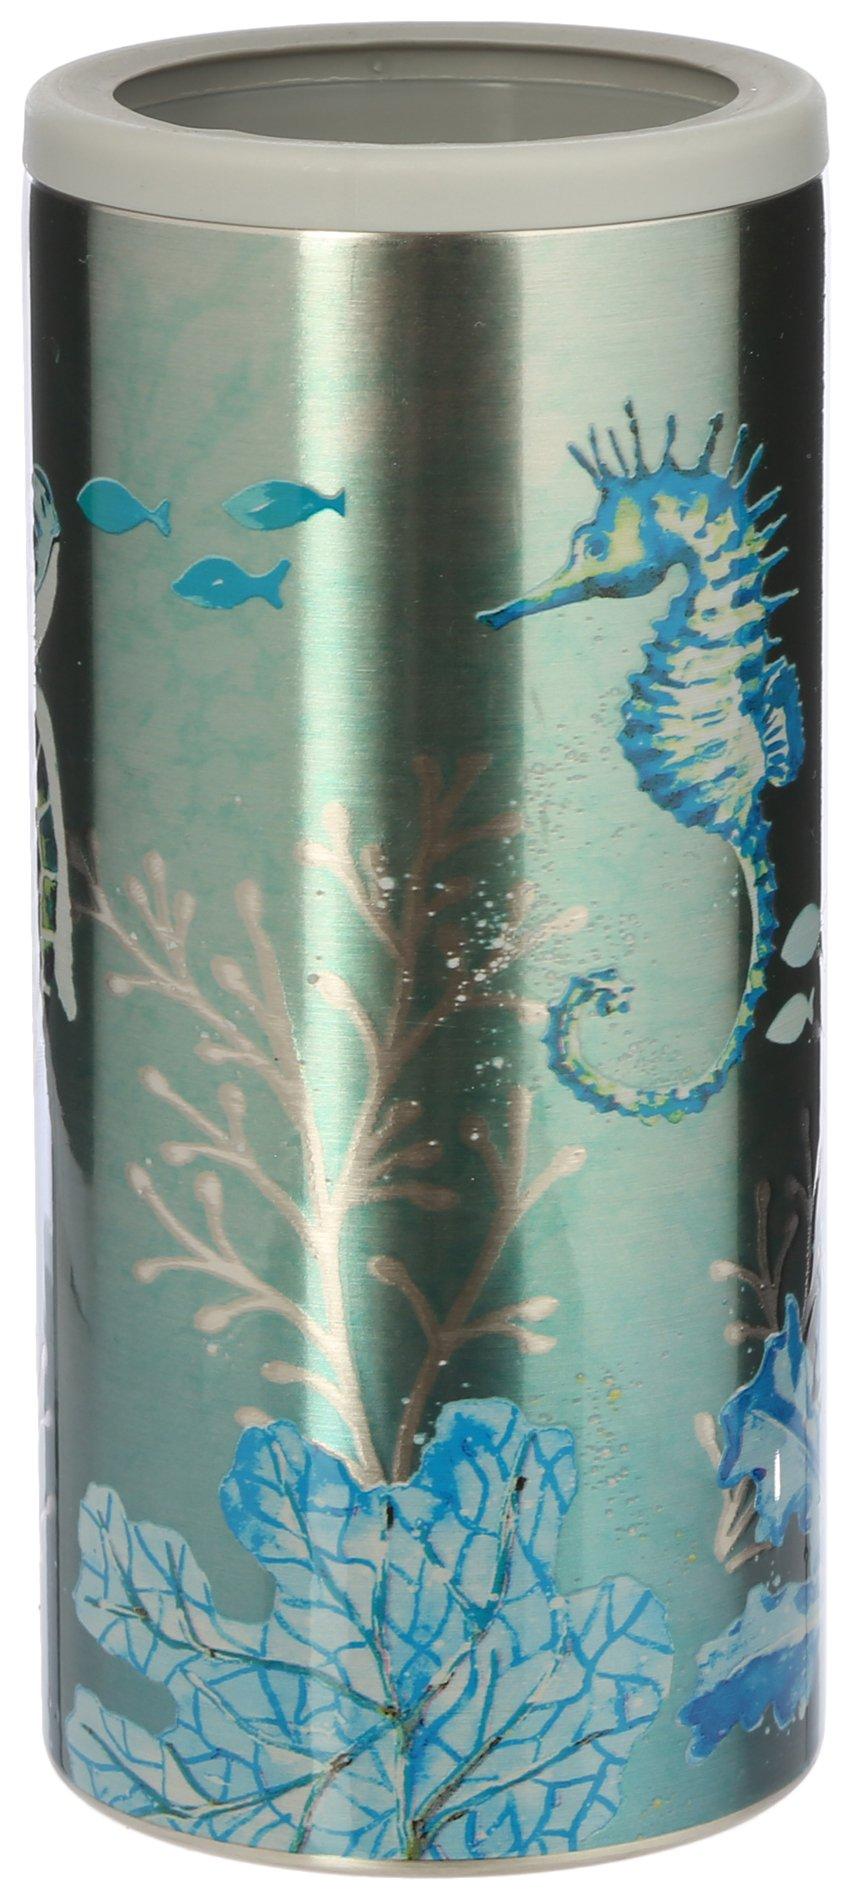 12 oz. Stainless Steel Seahorse Can Cooler